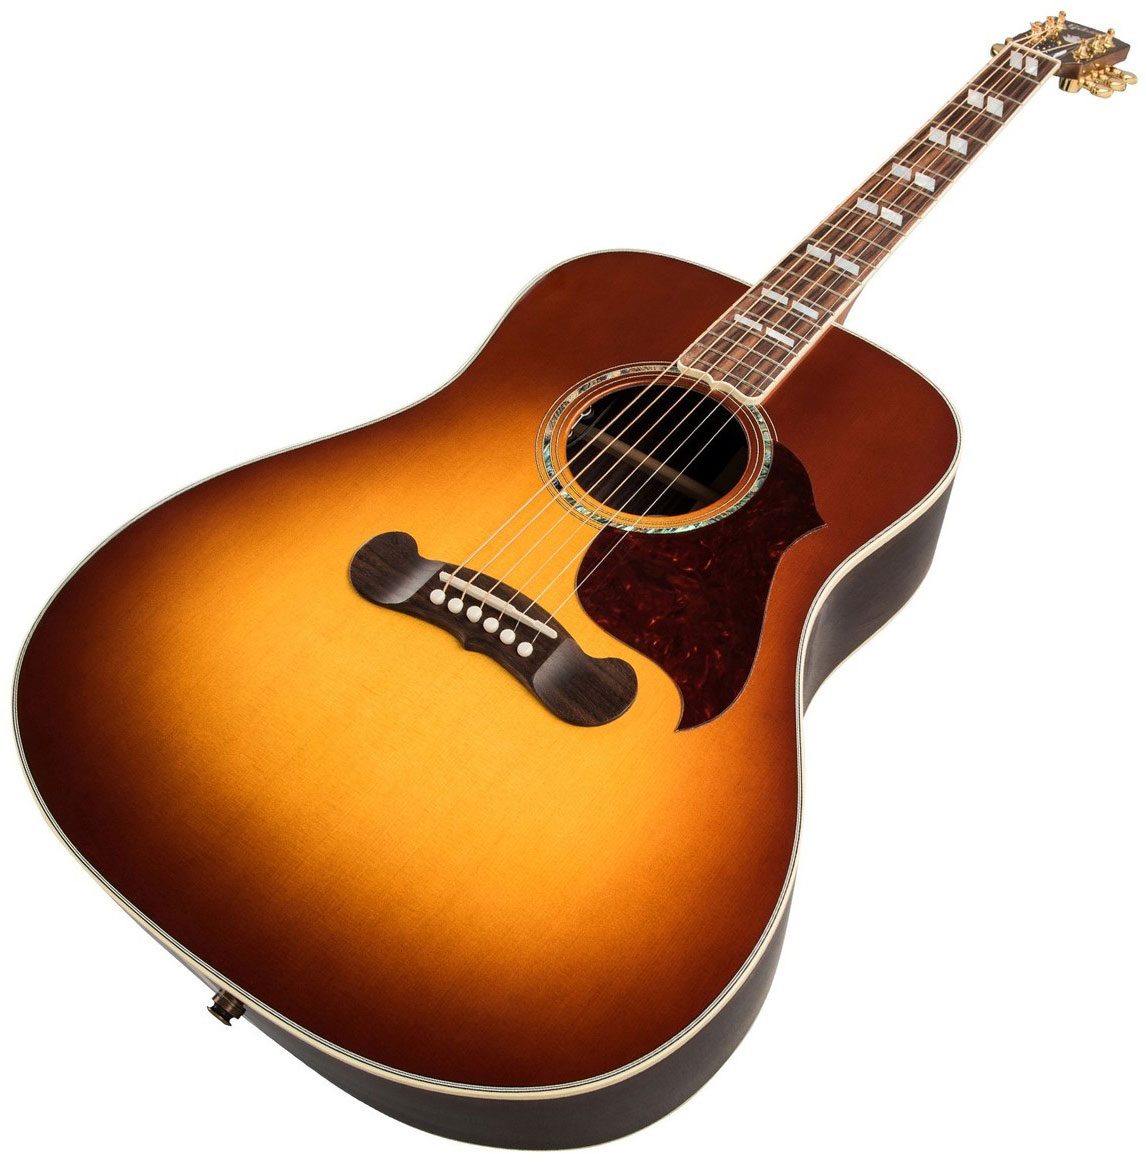 Gibson Songwriter 2019 Dreadnought Epicea Palissandre Rw - Burst - Acoustic guitar & electro - Variation 2